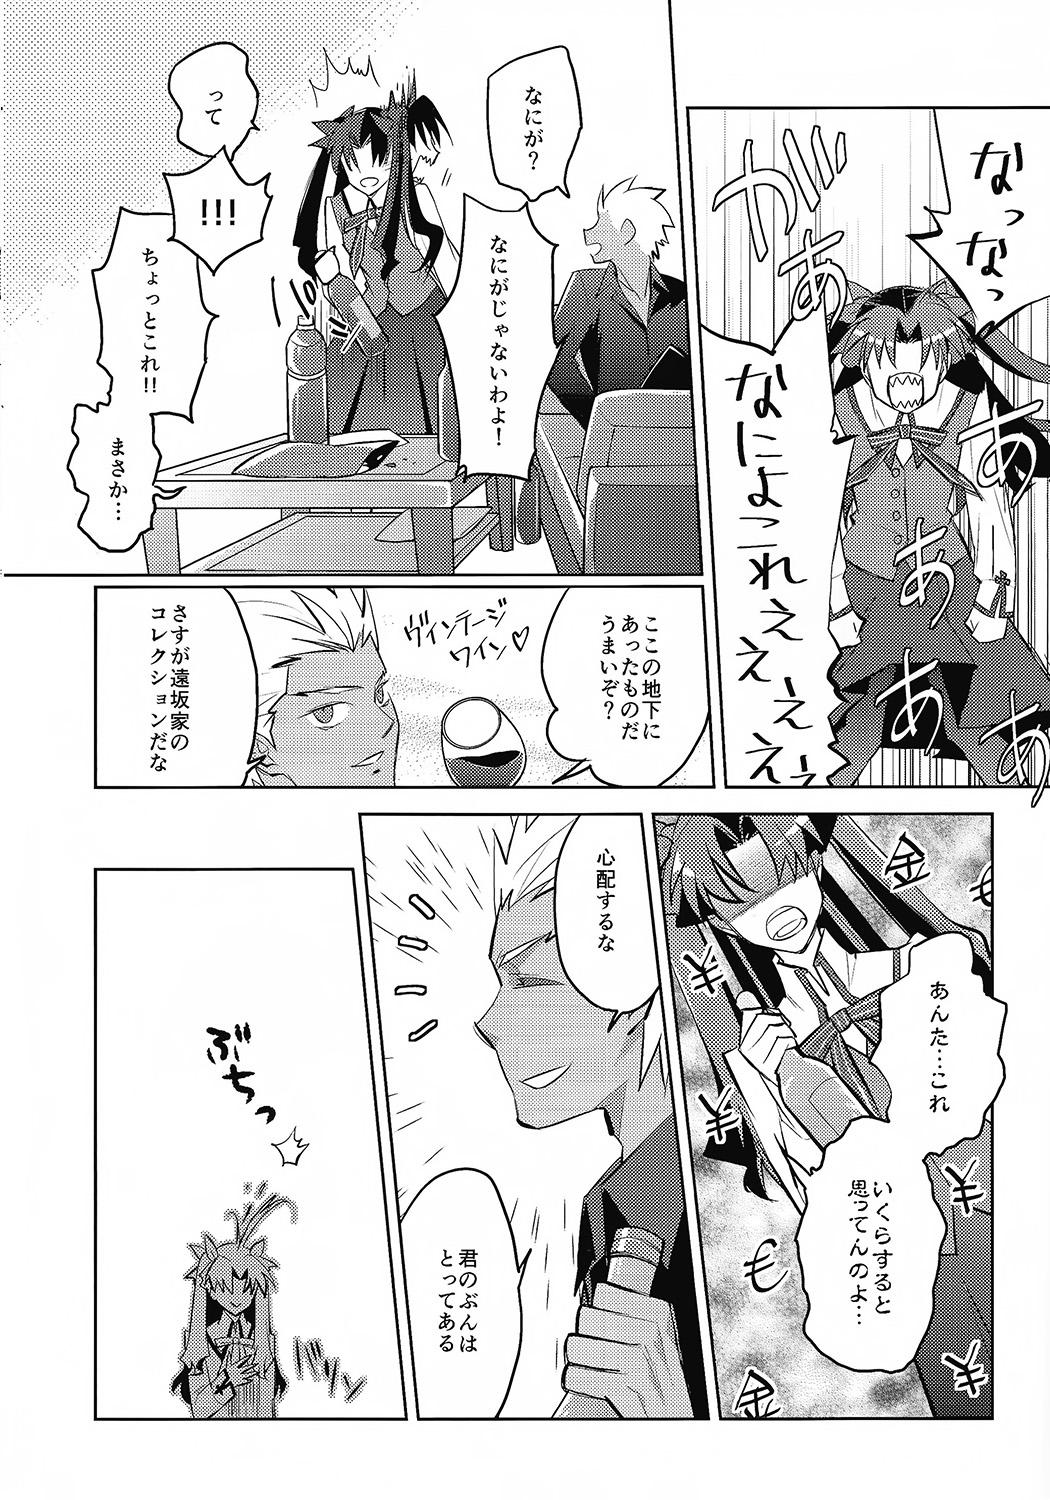 Penetration Alternative Gray - Fate stay night Fate hollow ataraxia Gay Bukkakeboy - Page 7